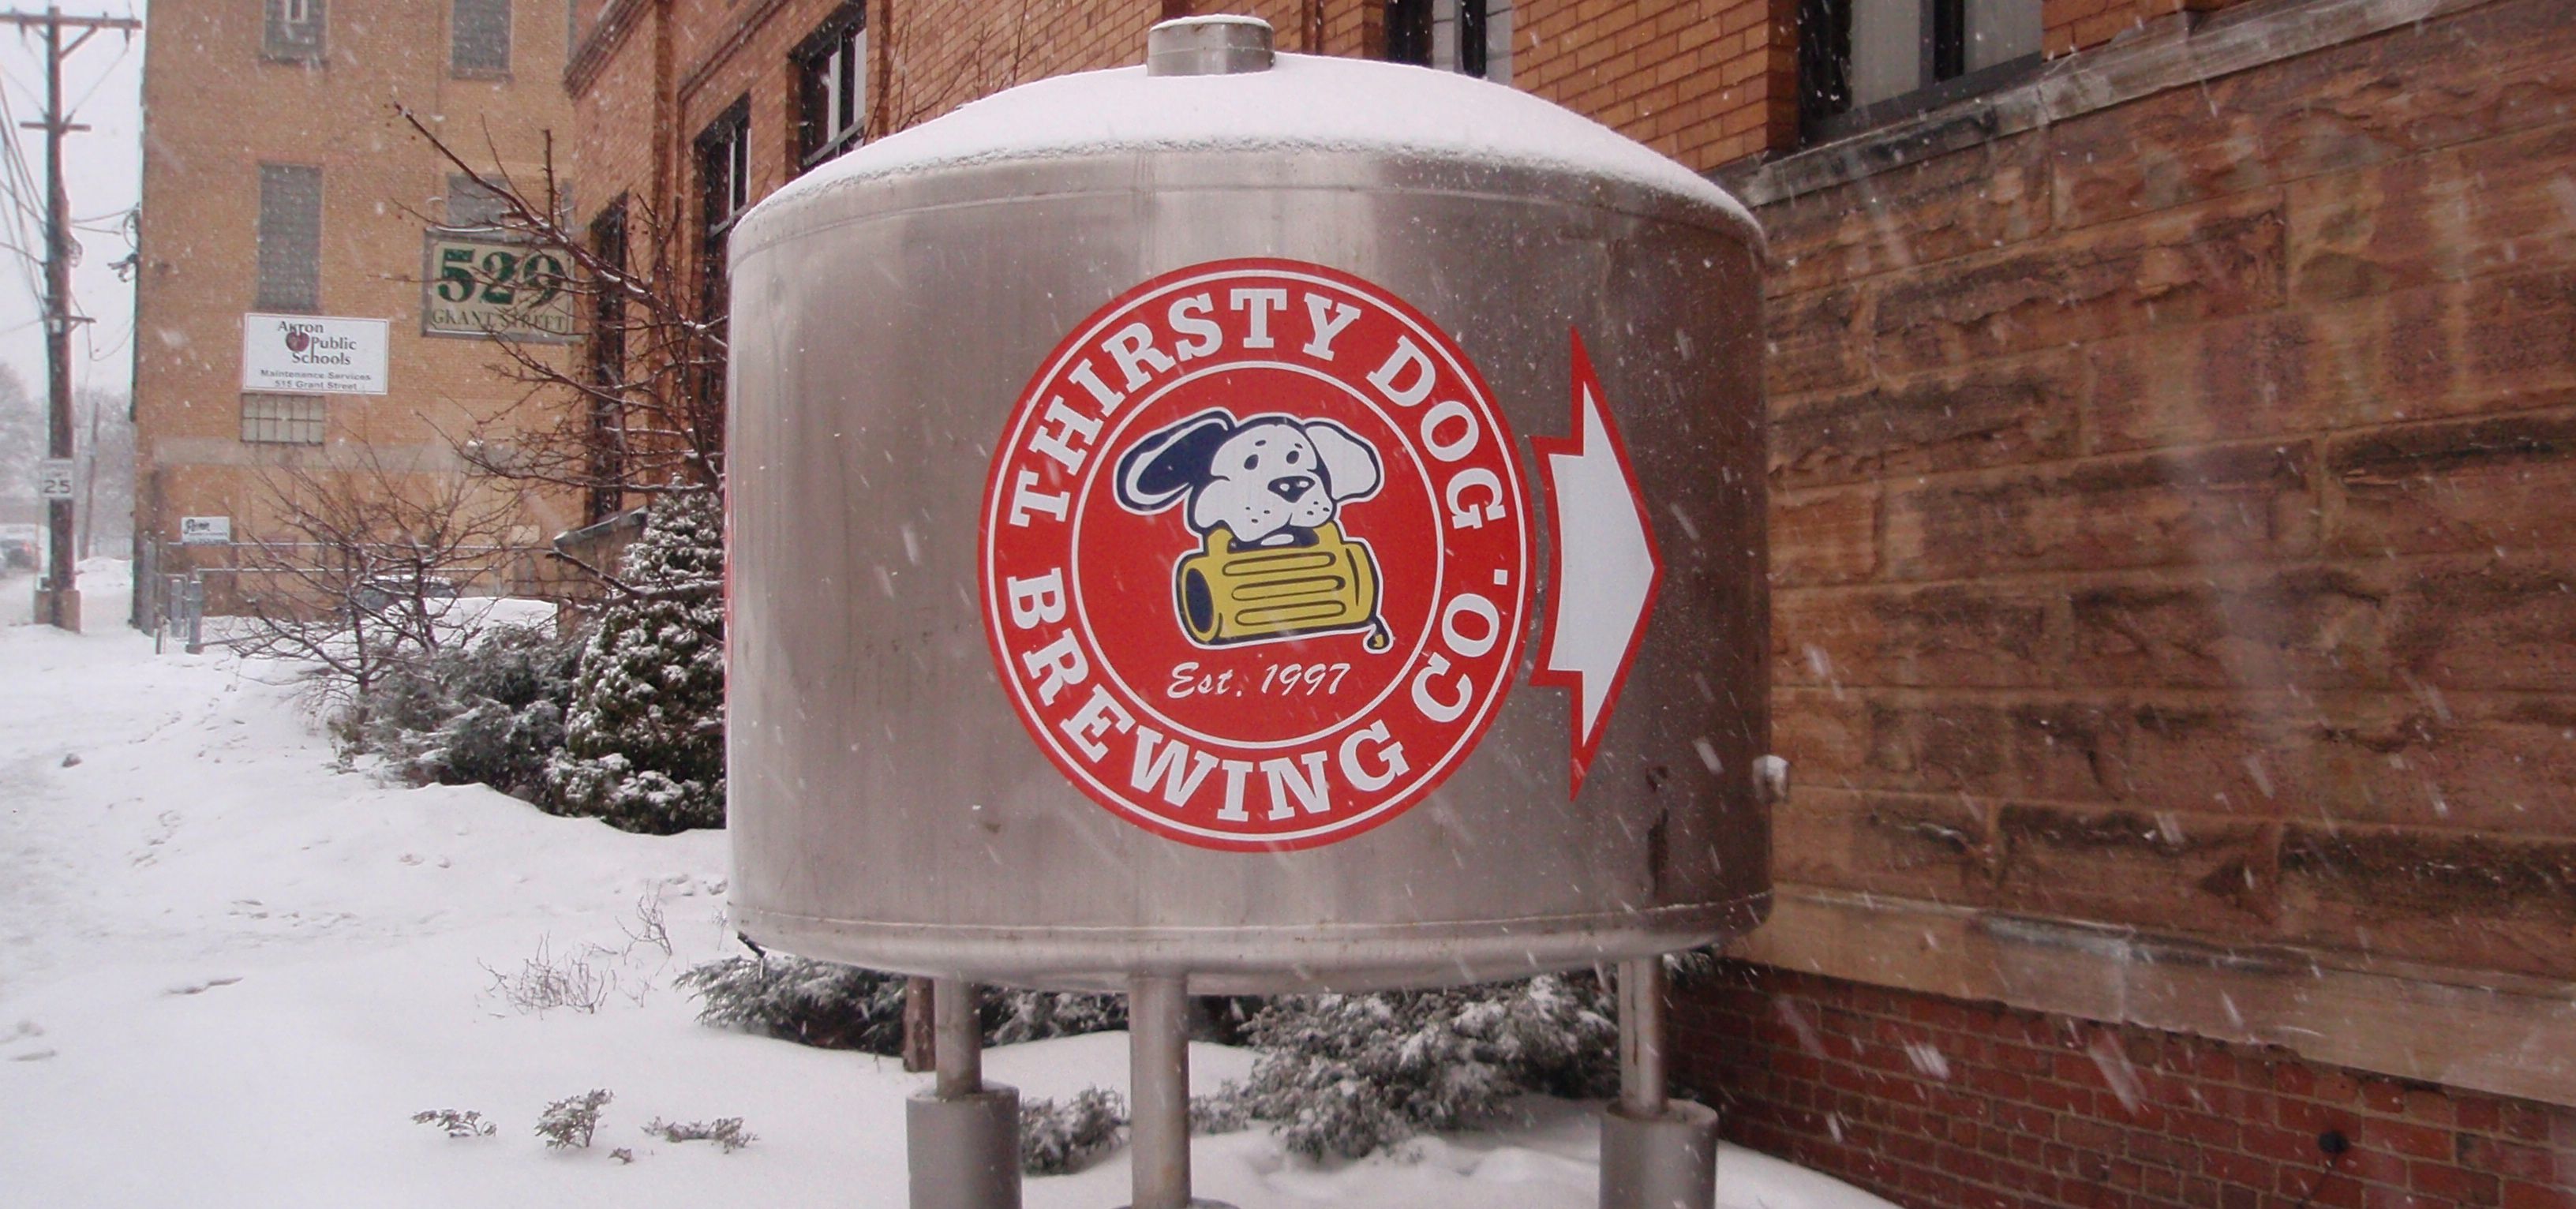 Thirsty Dog Brewing Company- 12 Dogs of Christmas Ale